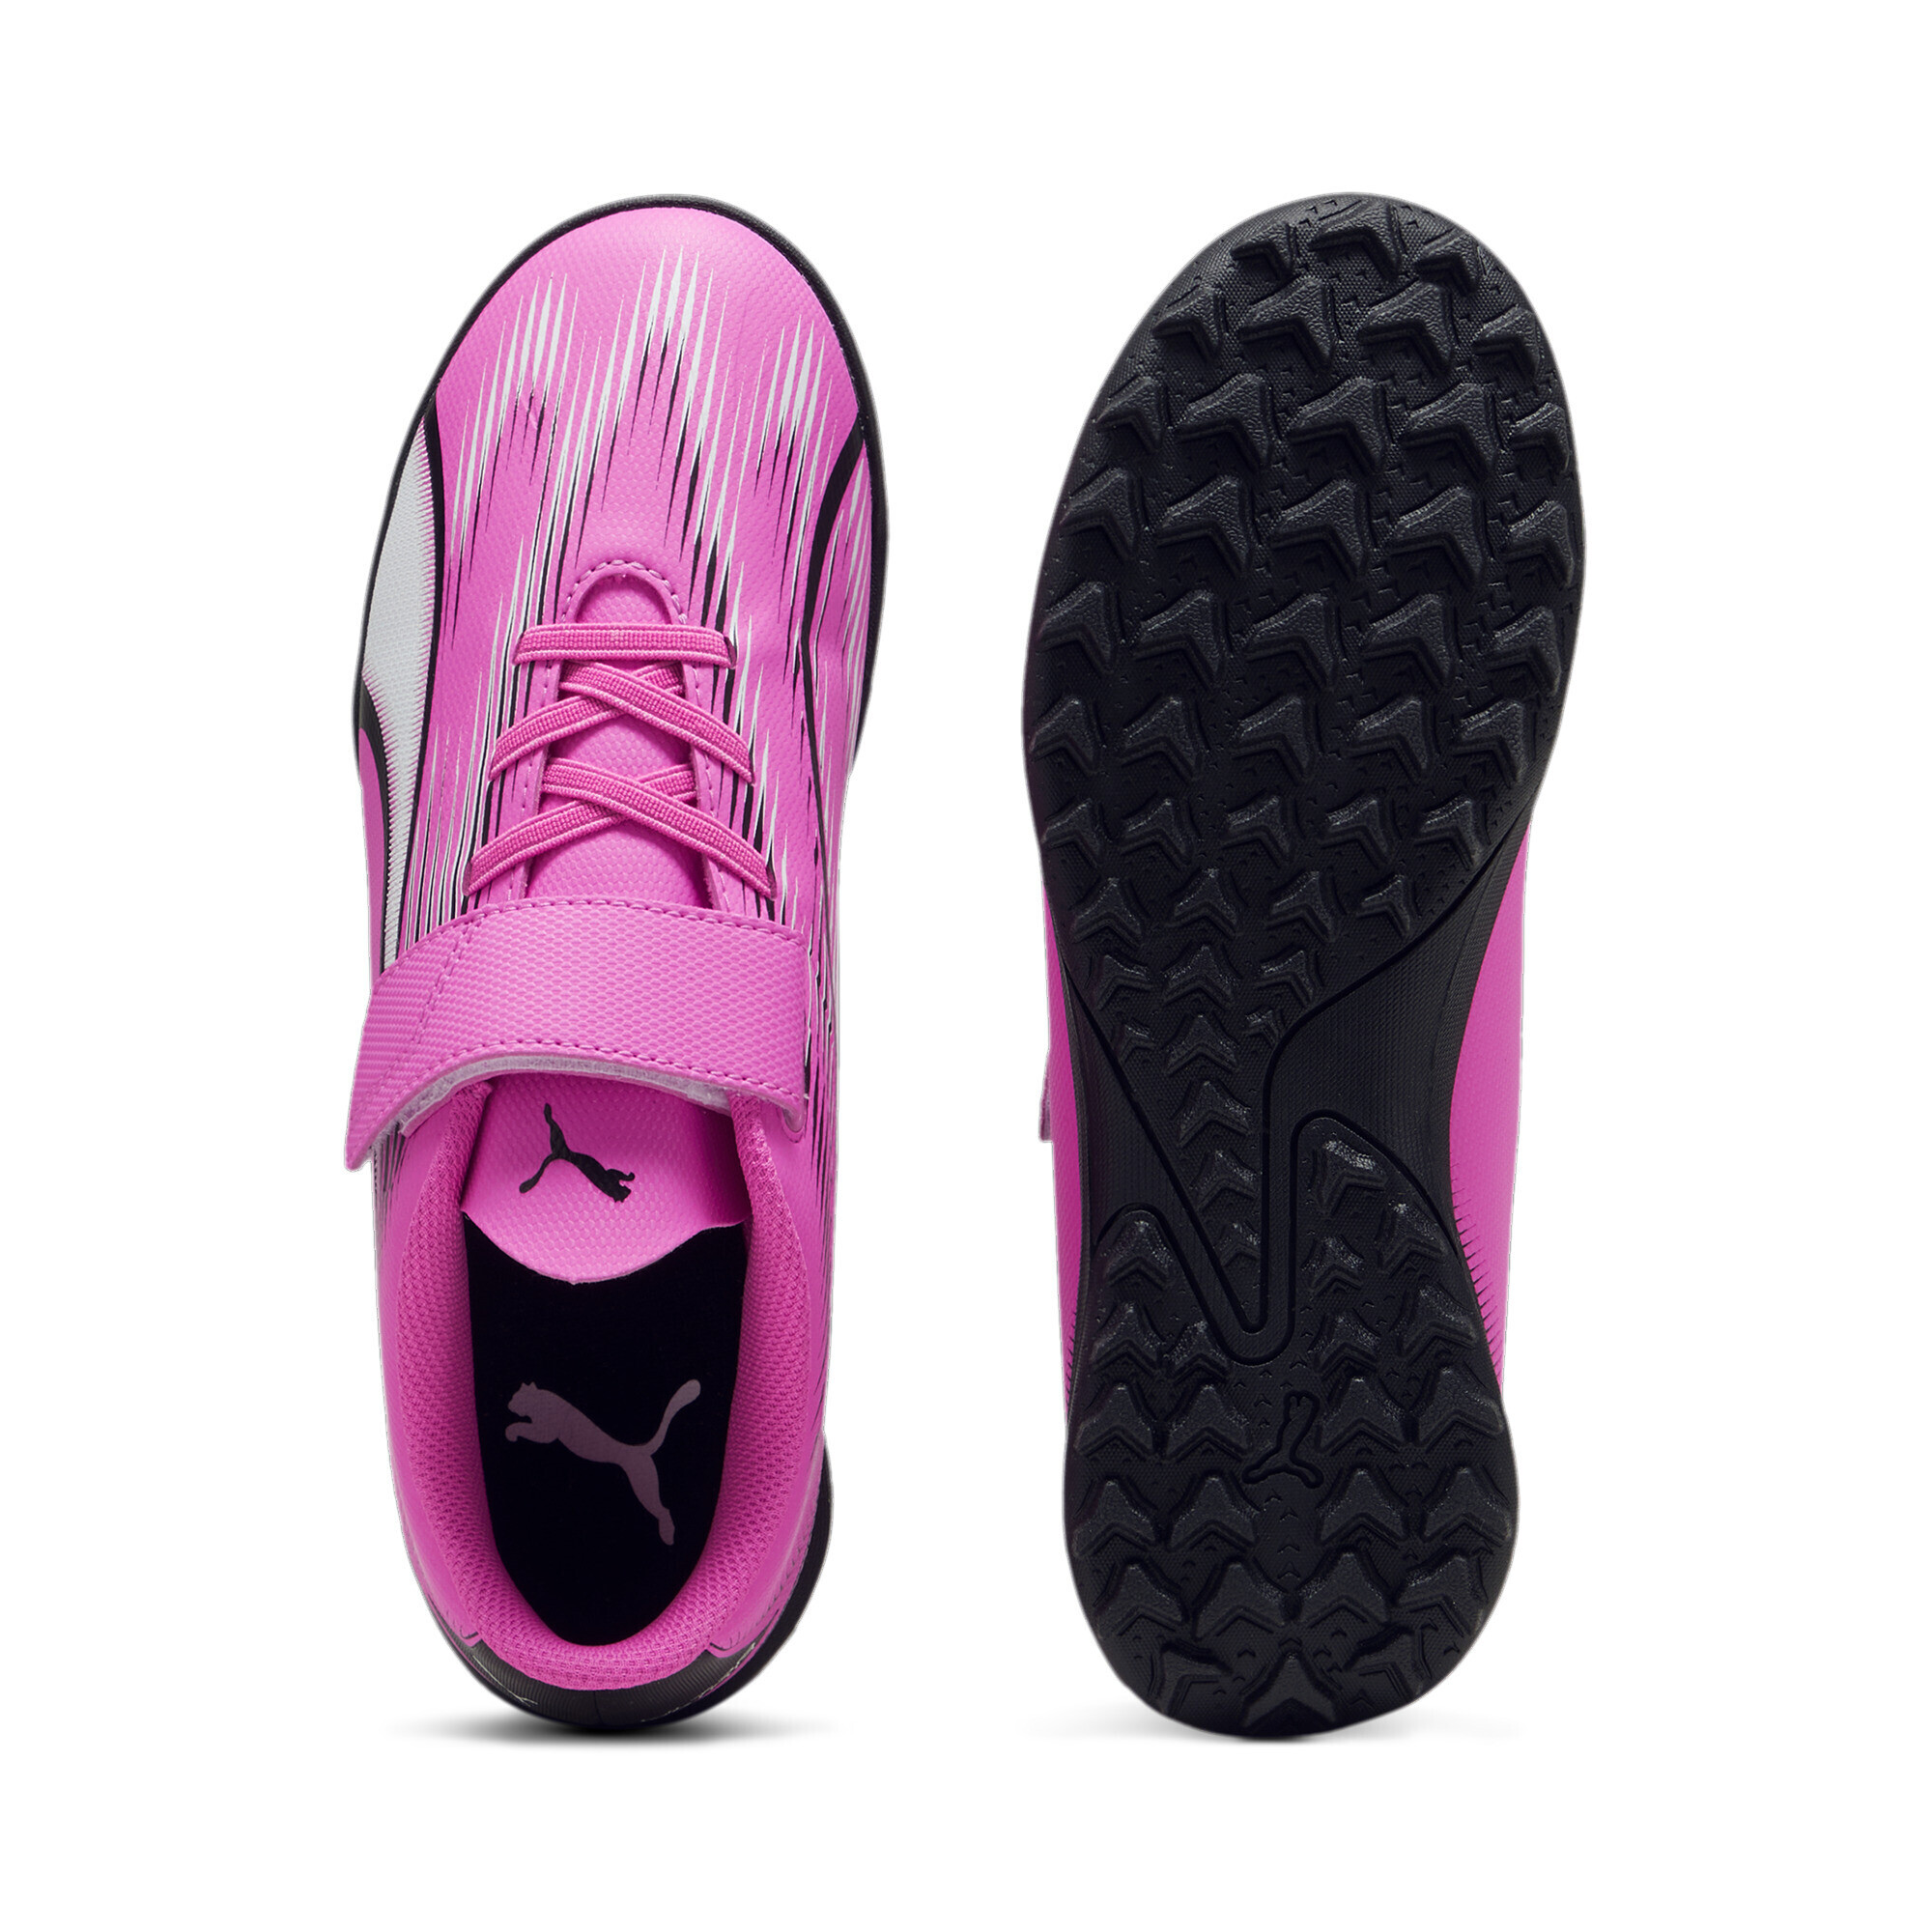 PUMA ULTRA PLAY TT Youth Football Boots In Pink, Size EU 37